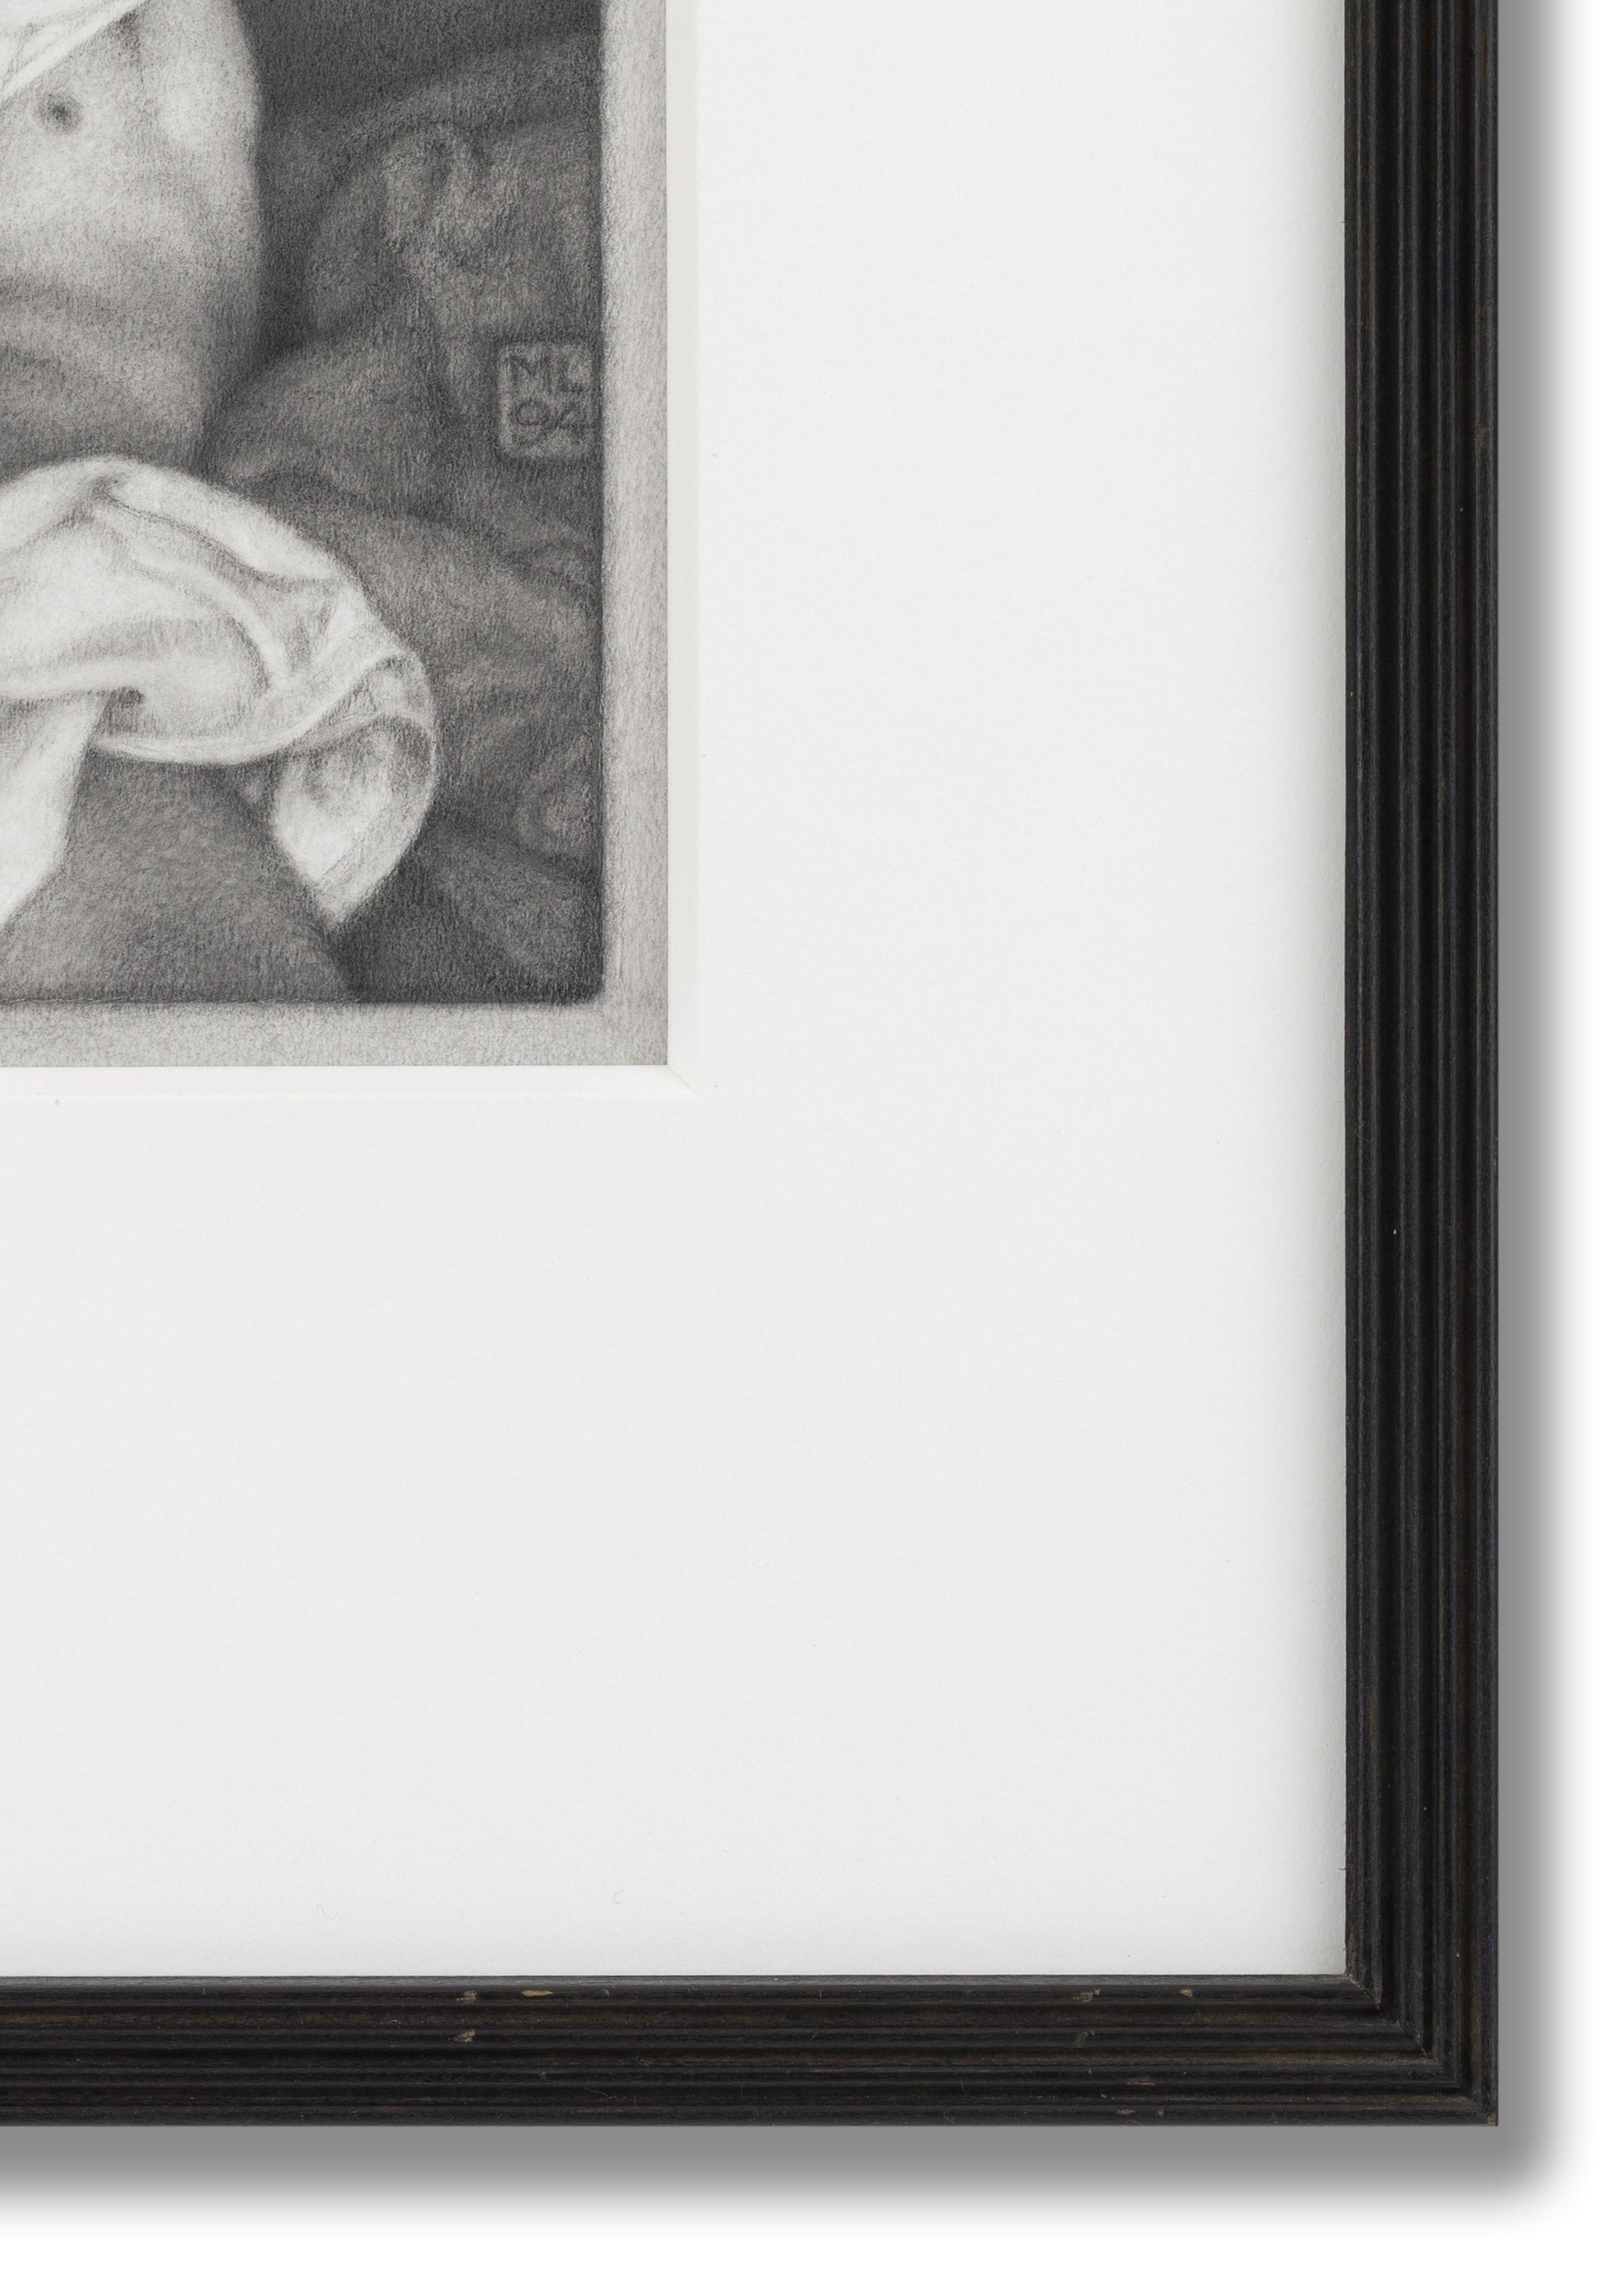 Graphite pencil on paper, signed and dated (middle right), 22cm x 20cm, (51cm x 46cm framed). (This work was kept by the artist for his personal collection. This was the only tonal drawing that remained in his collection at the time of his death in